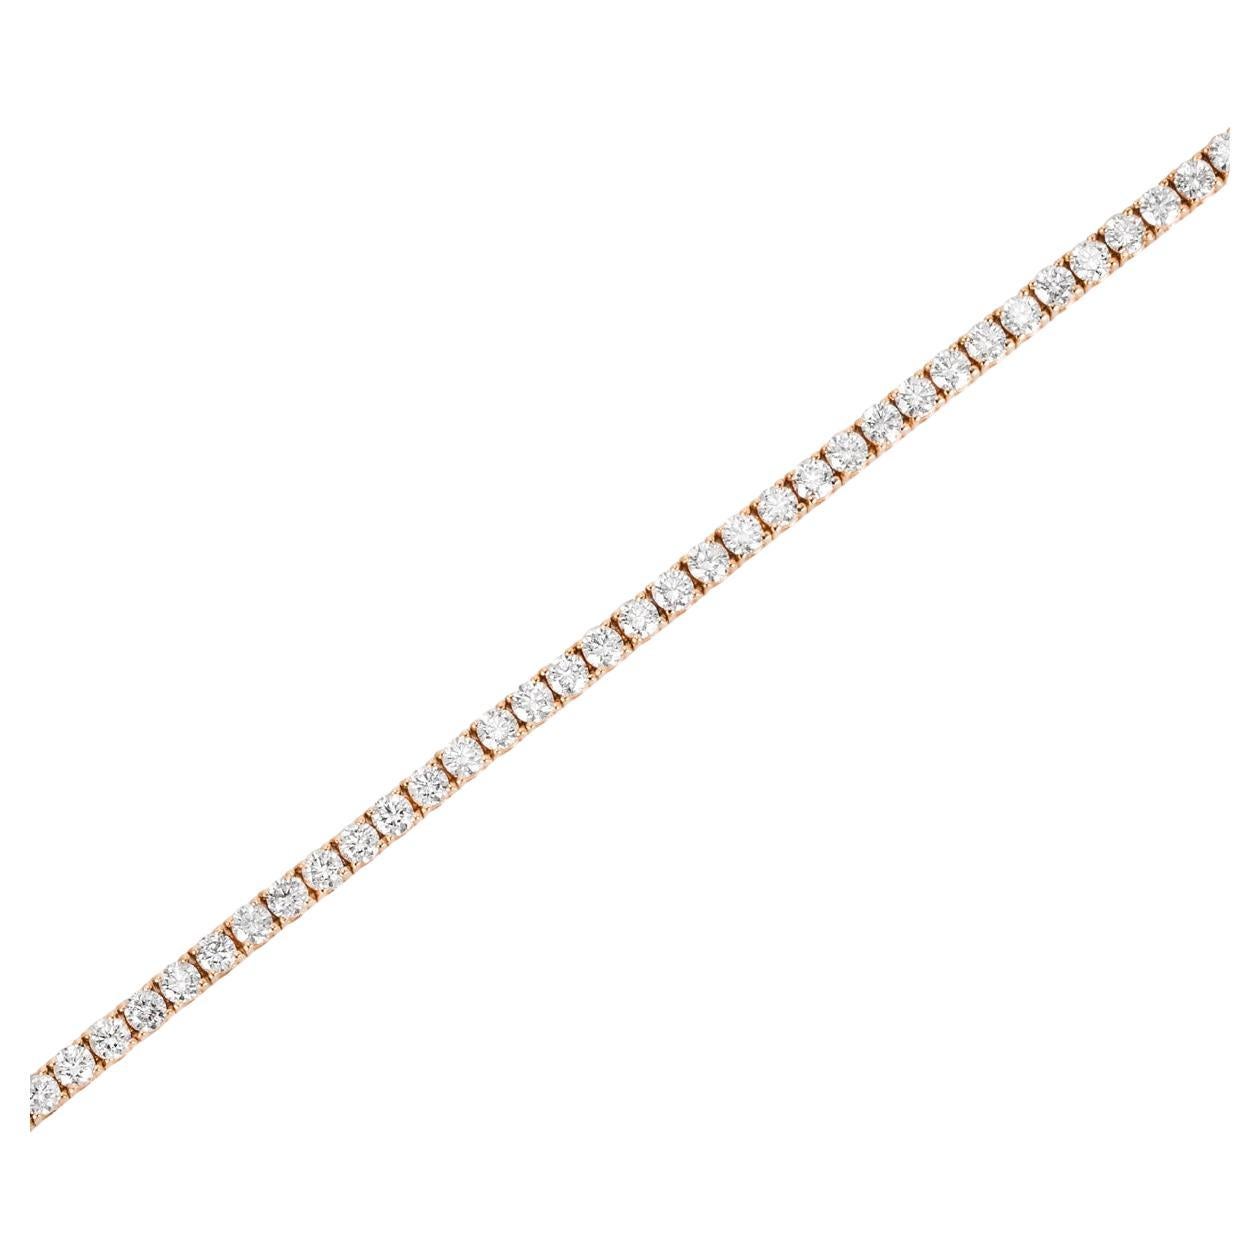 A timemless 18k rose gold diamond line bracelet. The tennis bracelet features 76 round brilliant cut diamonds set in a four prong mount with a total weight of 2.96ct, F-G colour and SI clarity. The 7.25-inch long bracelet measures 2.5mm in width,